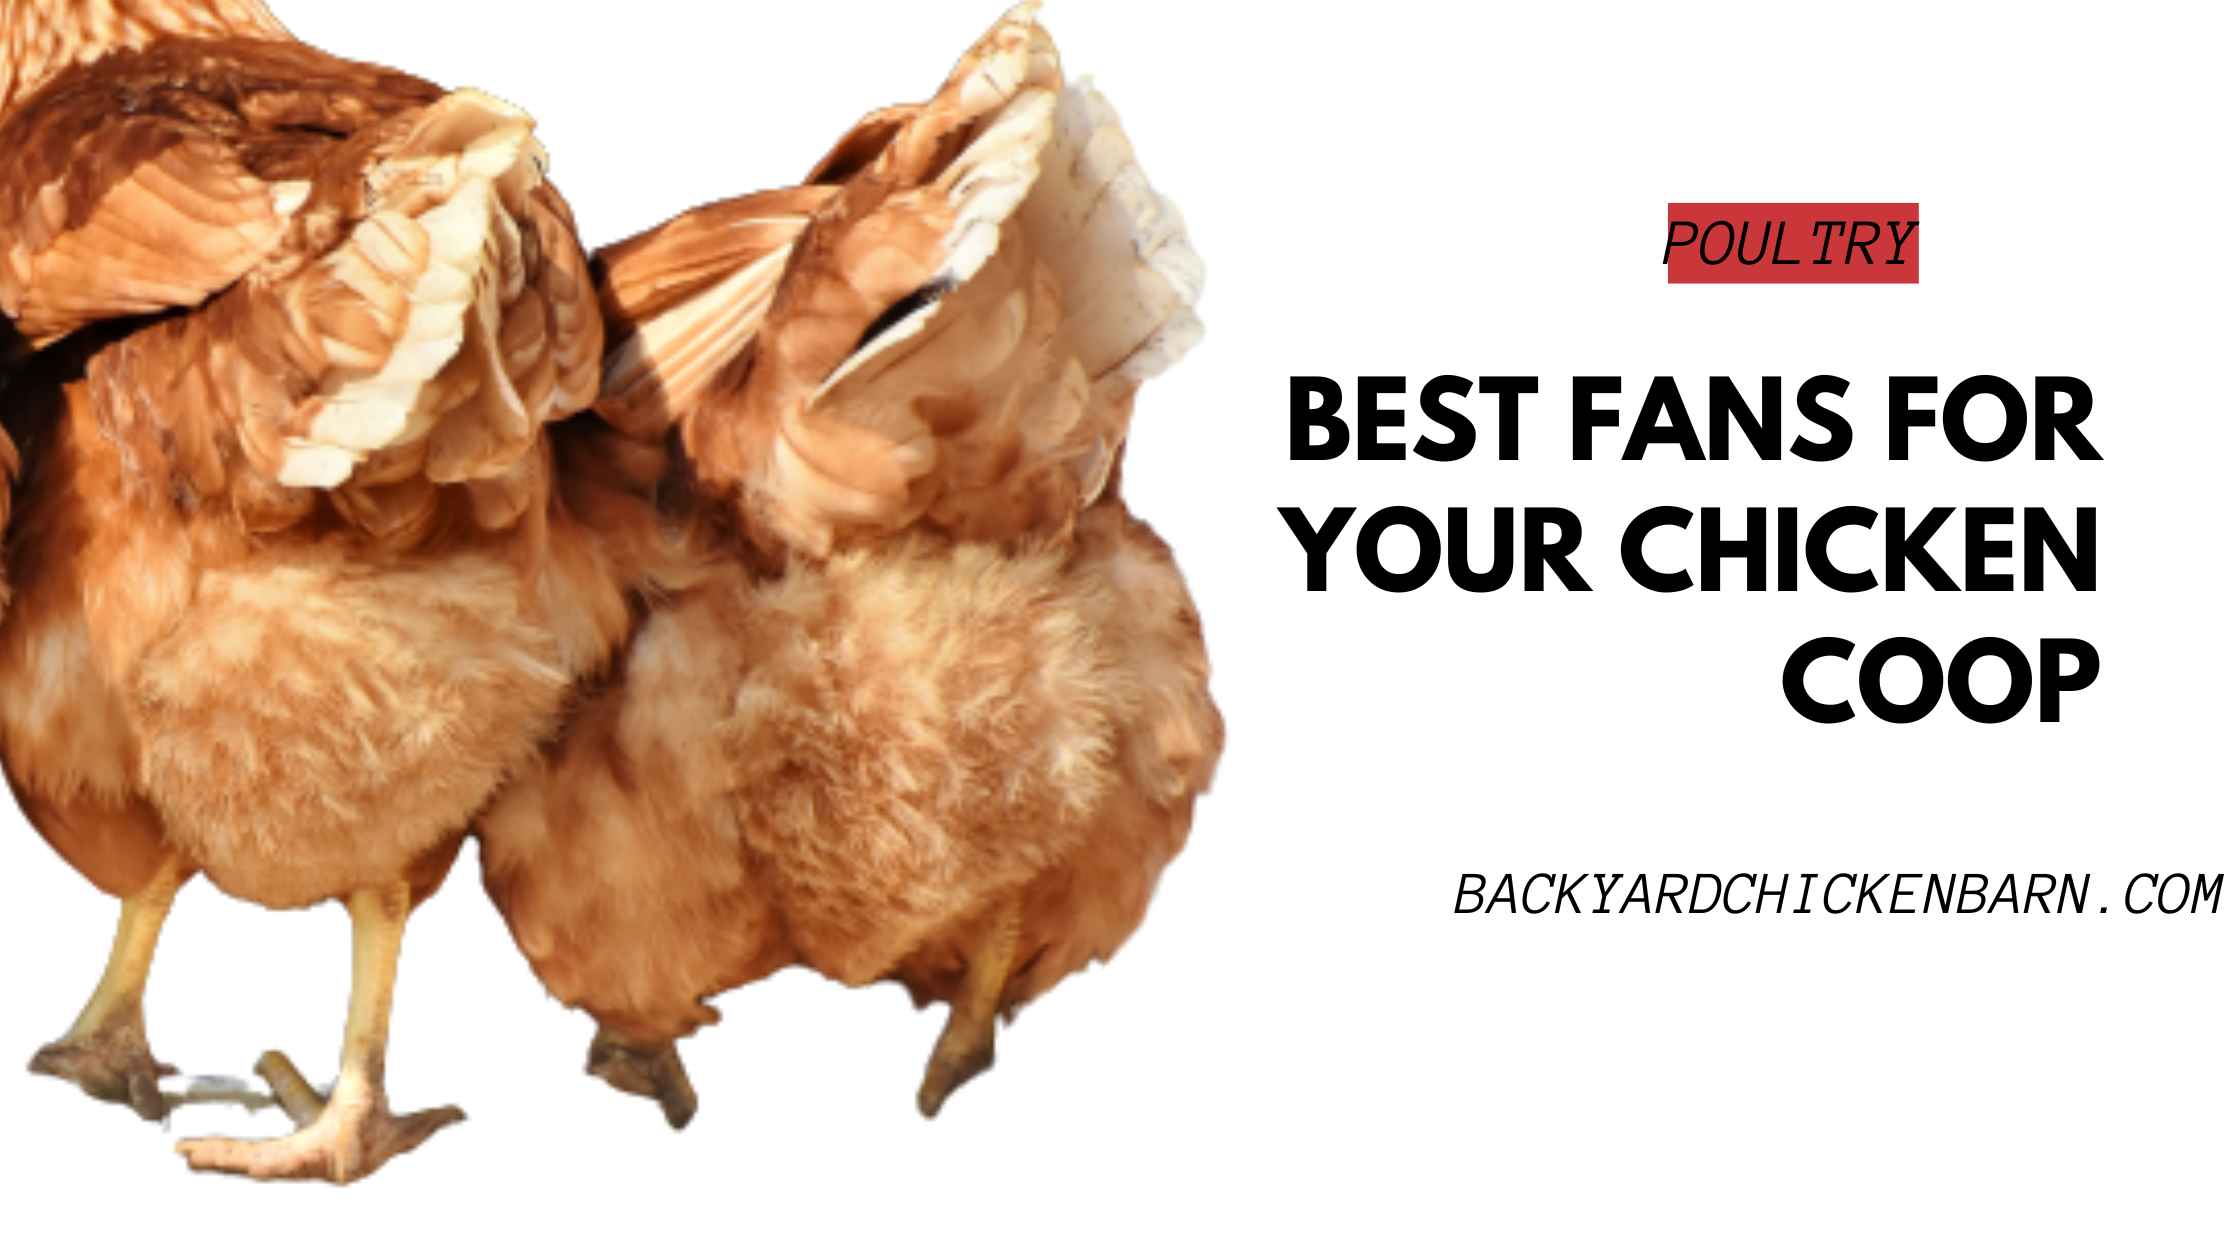 Best Fans for Your Chicken Coop